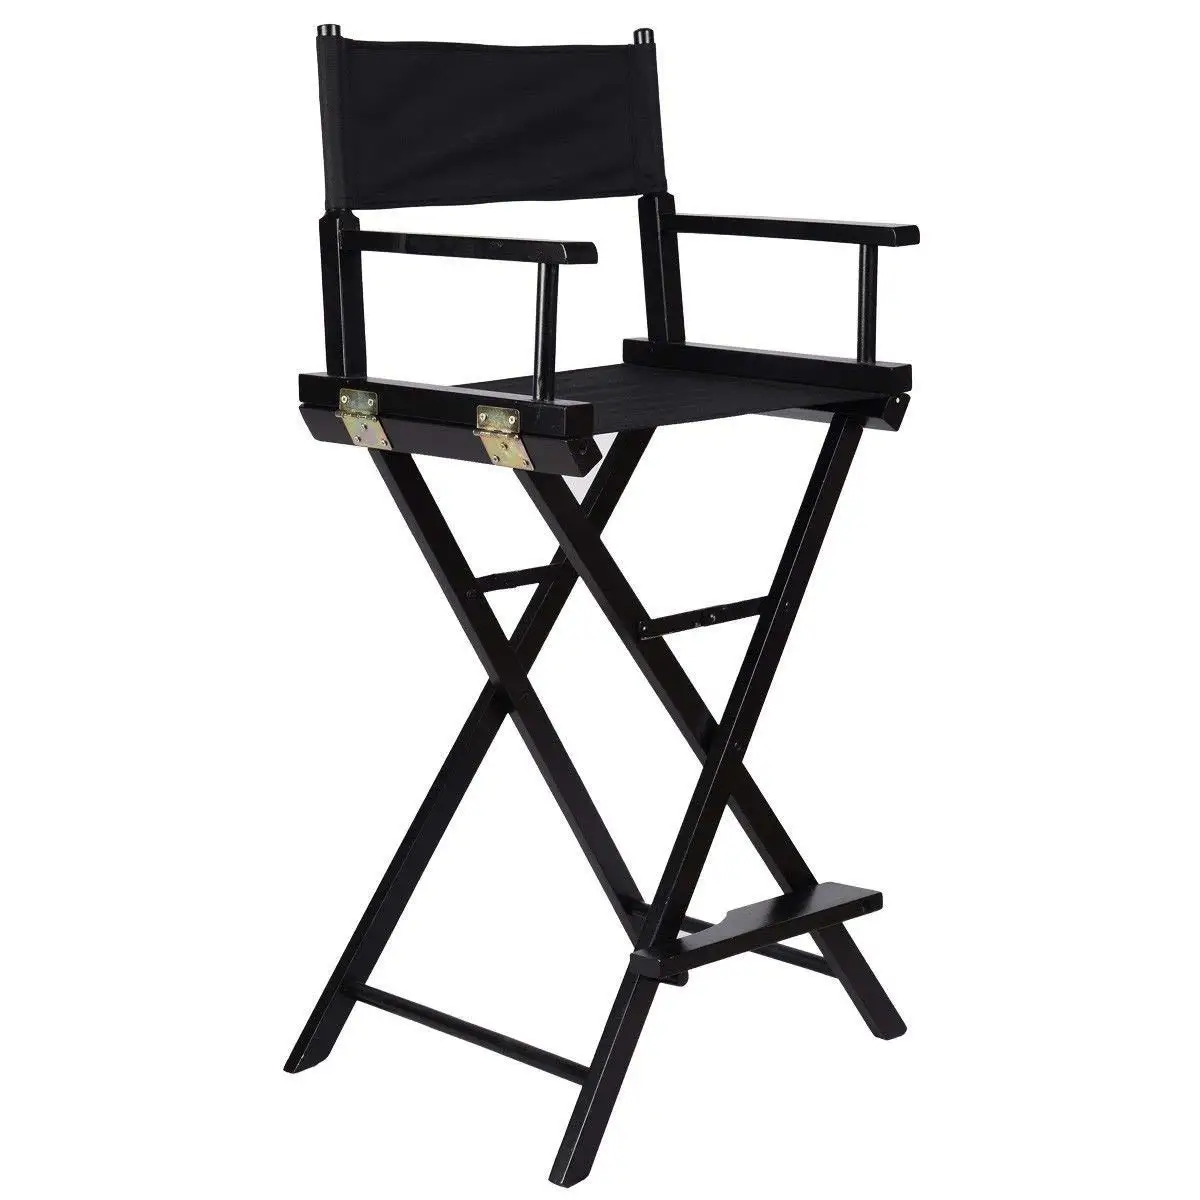 COLIBROX--Professional Makeup Artist Directors Chair Wood Light Weight Foldable Black New,tall director chairs,personalized directors chair,personalized makeup artist chair,cheap makeup chair